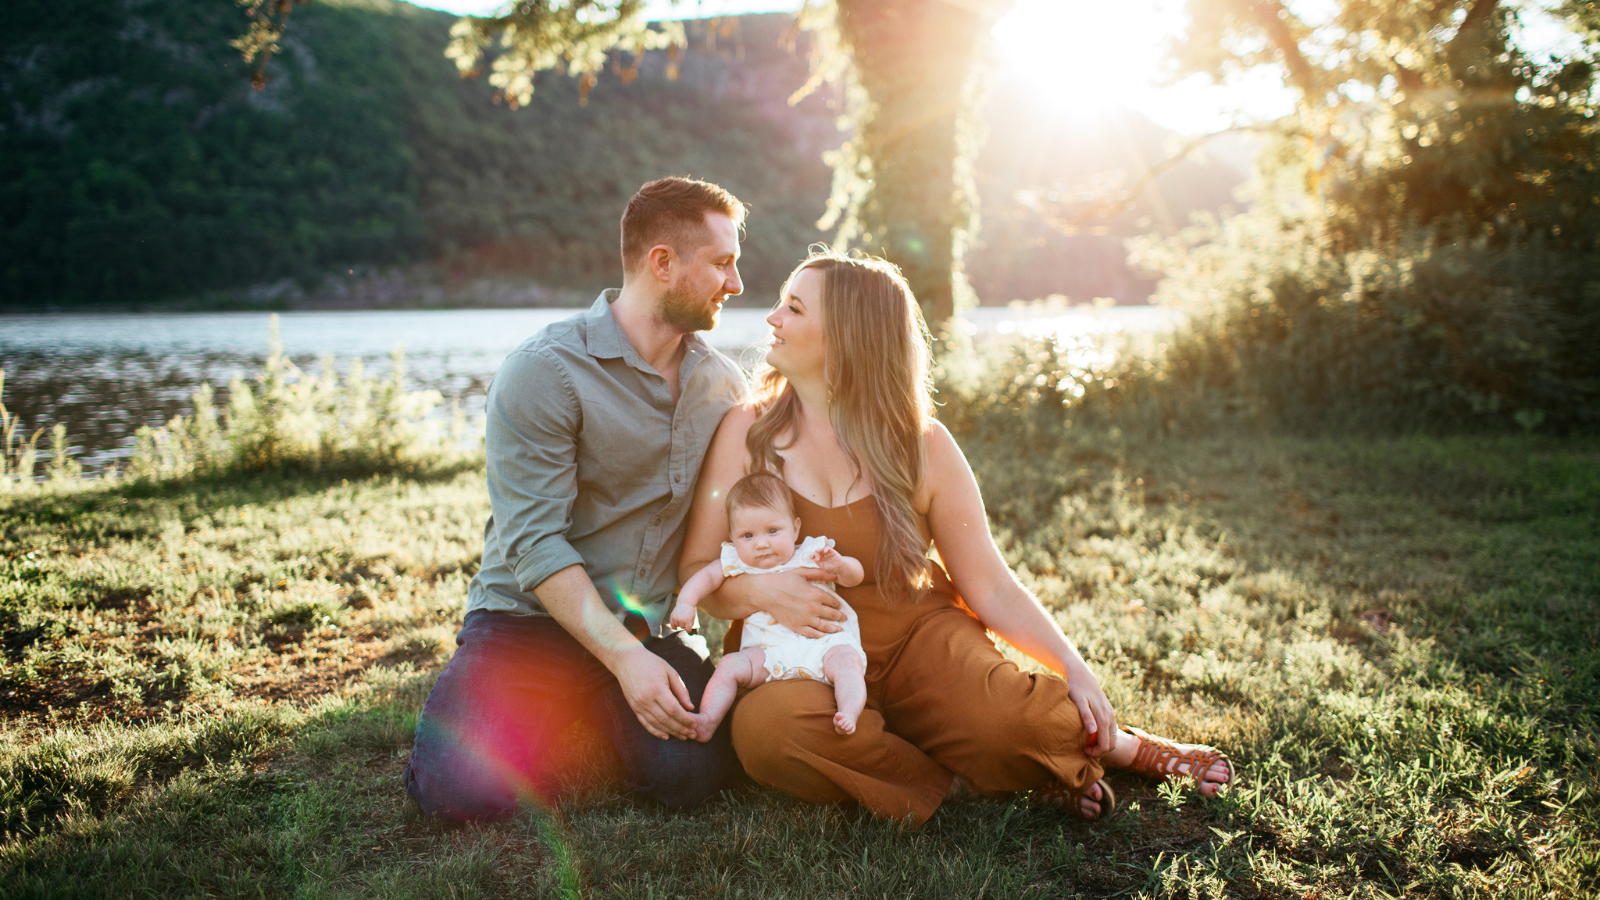 Every Story Matters: Fertility Patients Share Their Journey | NIAW 2022